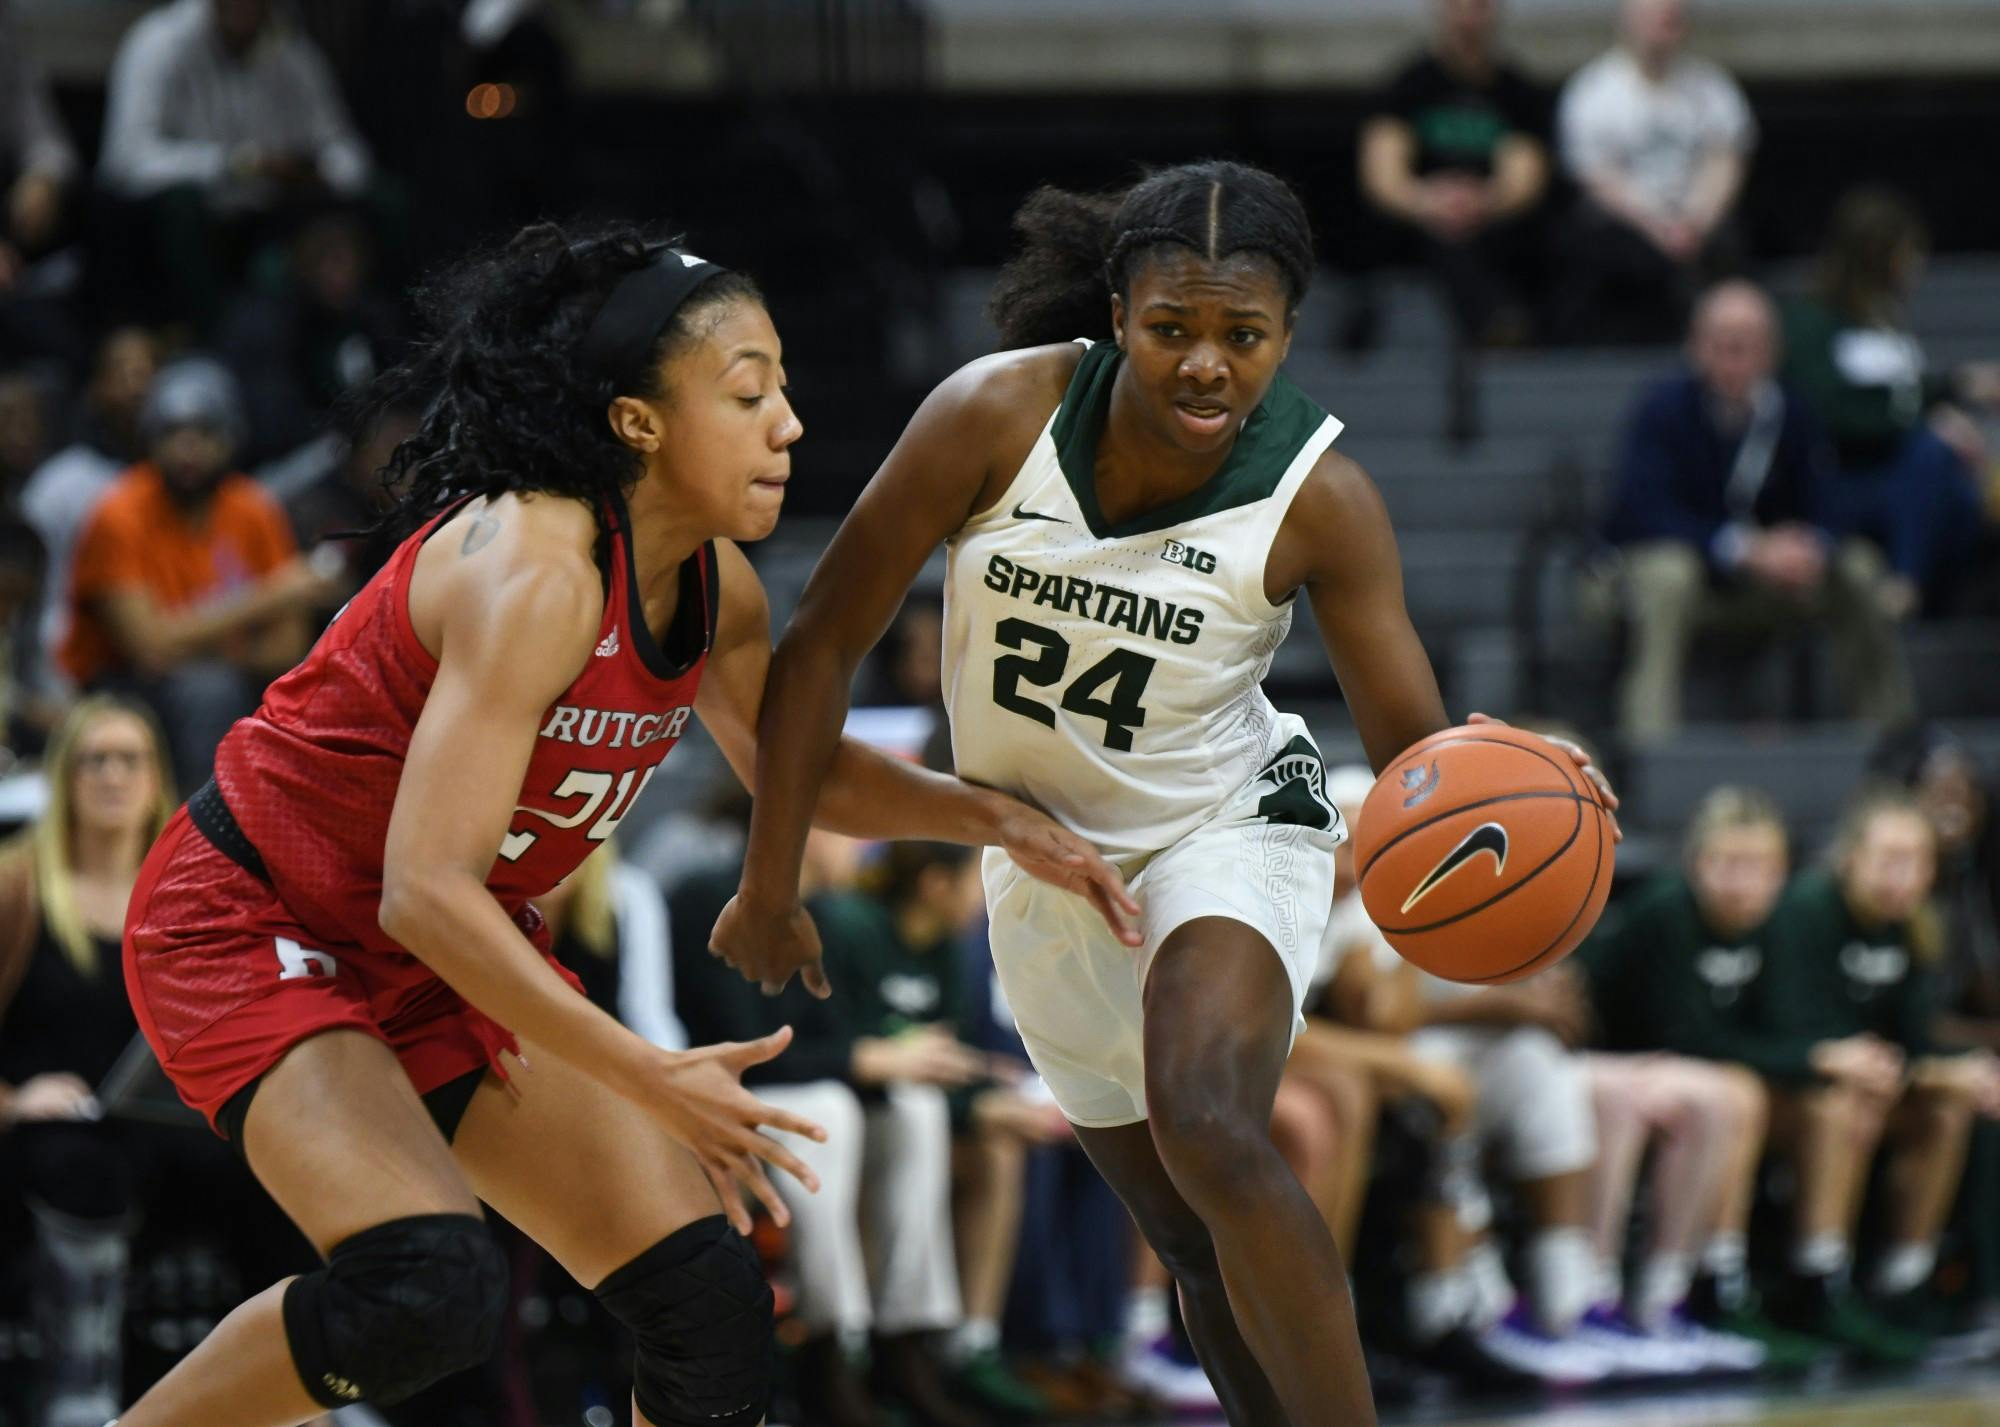 <p>Then-sophomore guard Nia Clouden (24) pushes past a defender during the women&#x27;s basketball game against Rutgers at the Breslin Center on Feb. 13, 2020.</p>